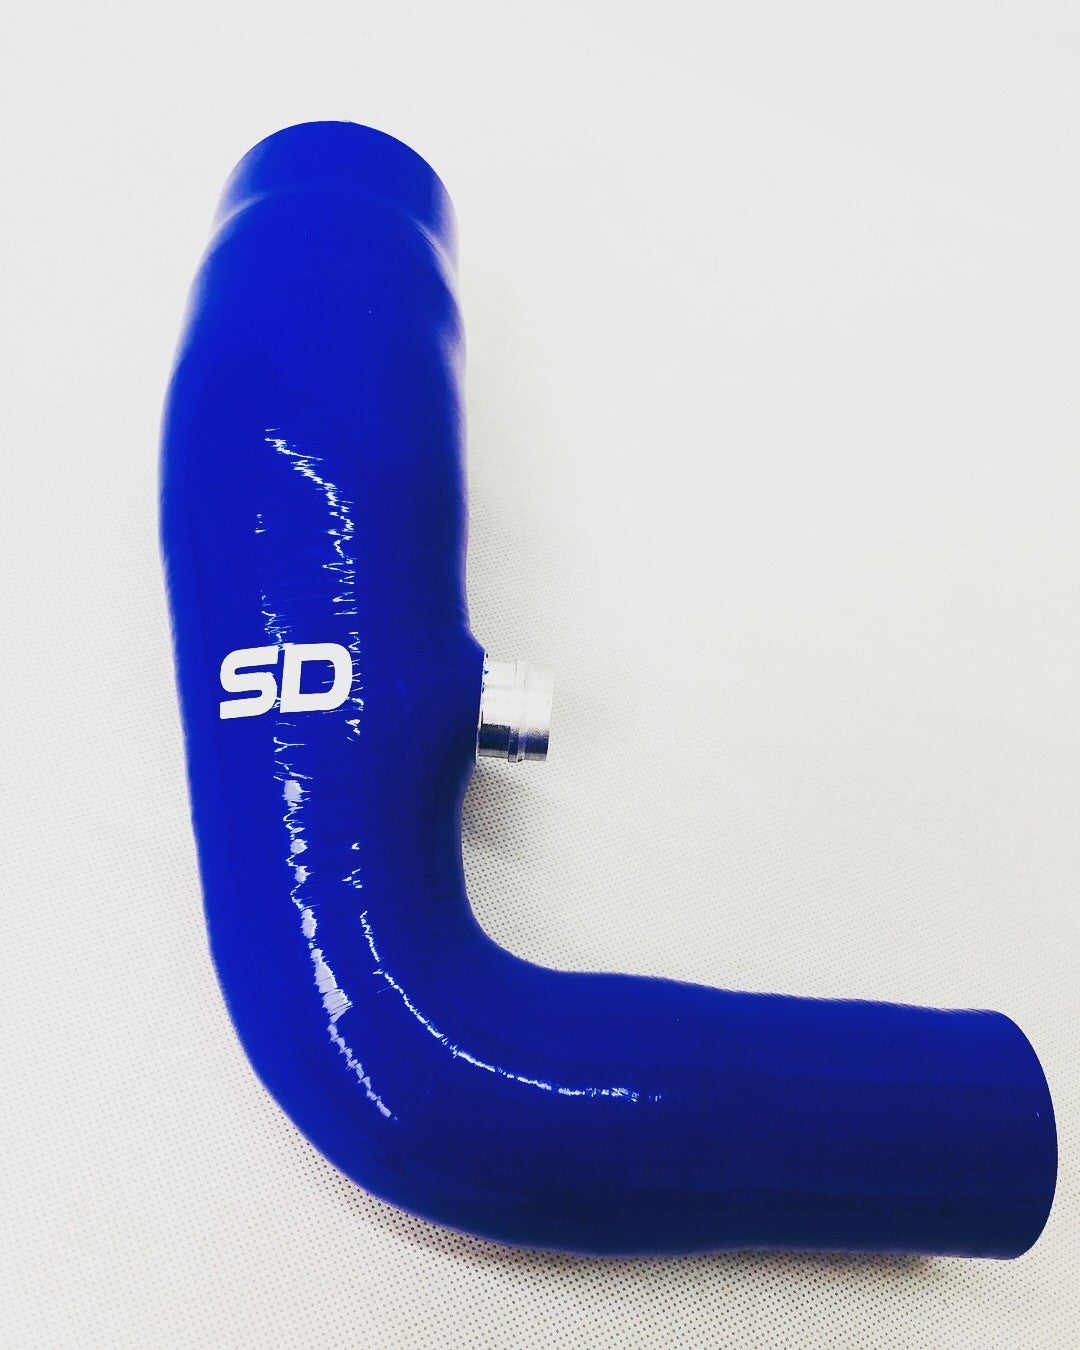 Ford Fiesta Mk7.5 1.0 Eco-Boost V2 Secondary Induction Hose Kit - SiCo- Developments